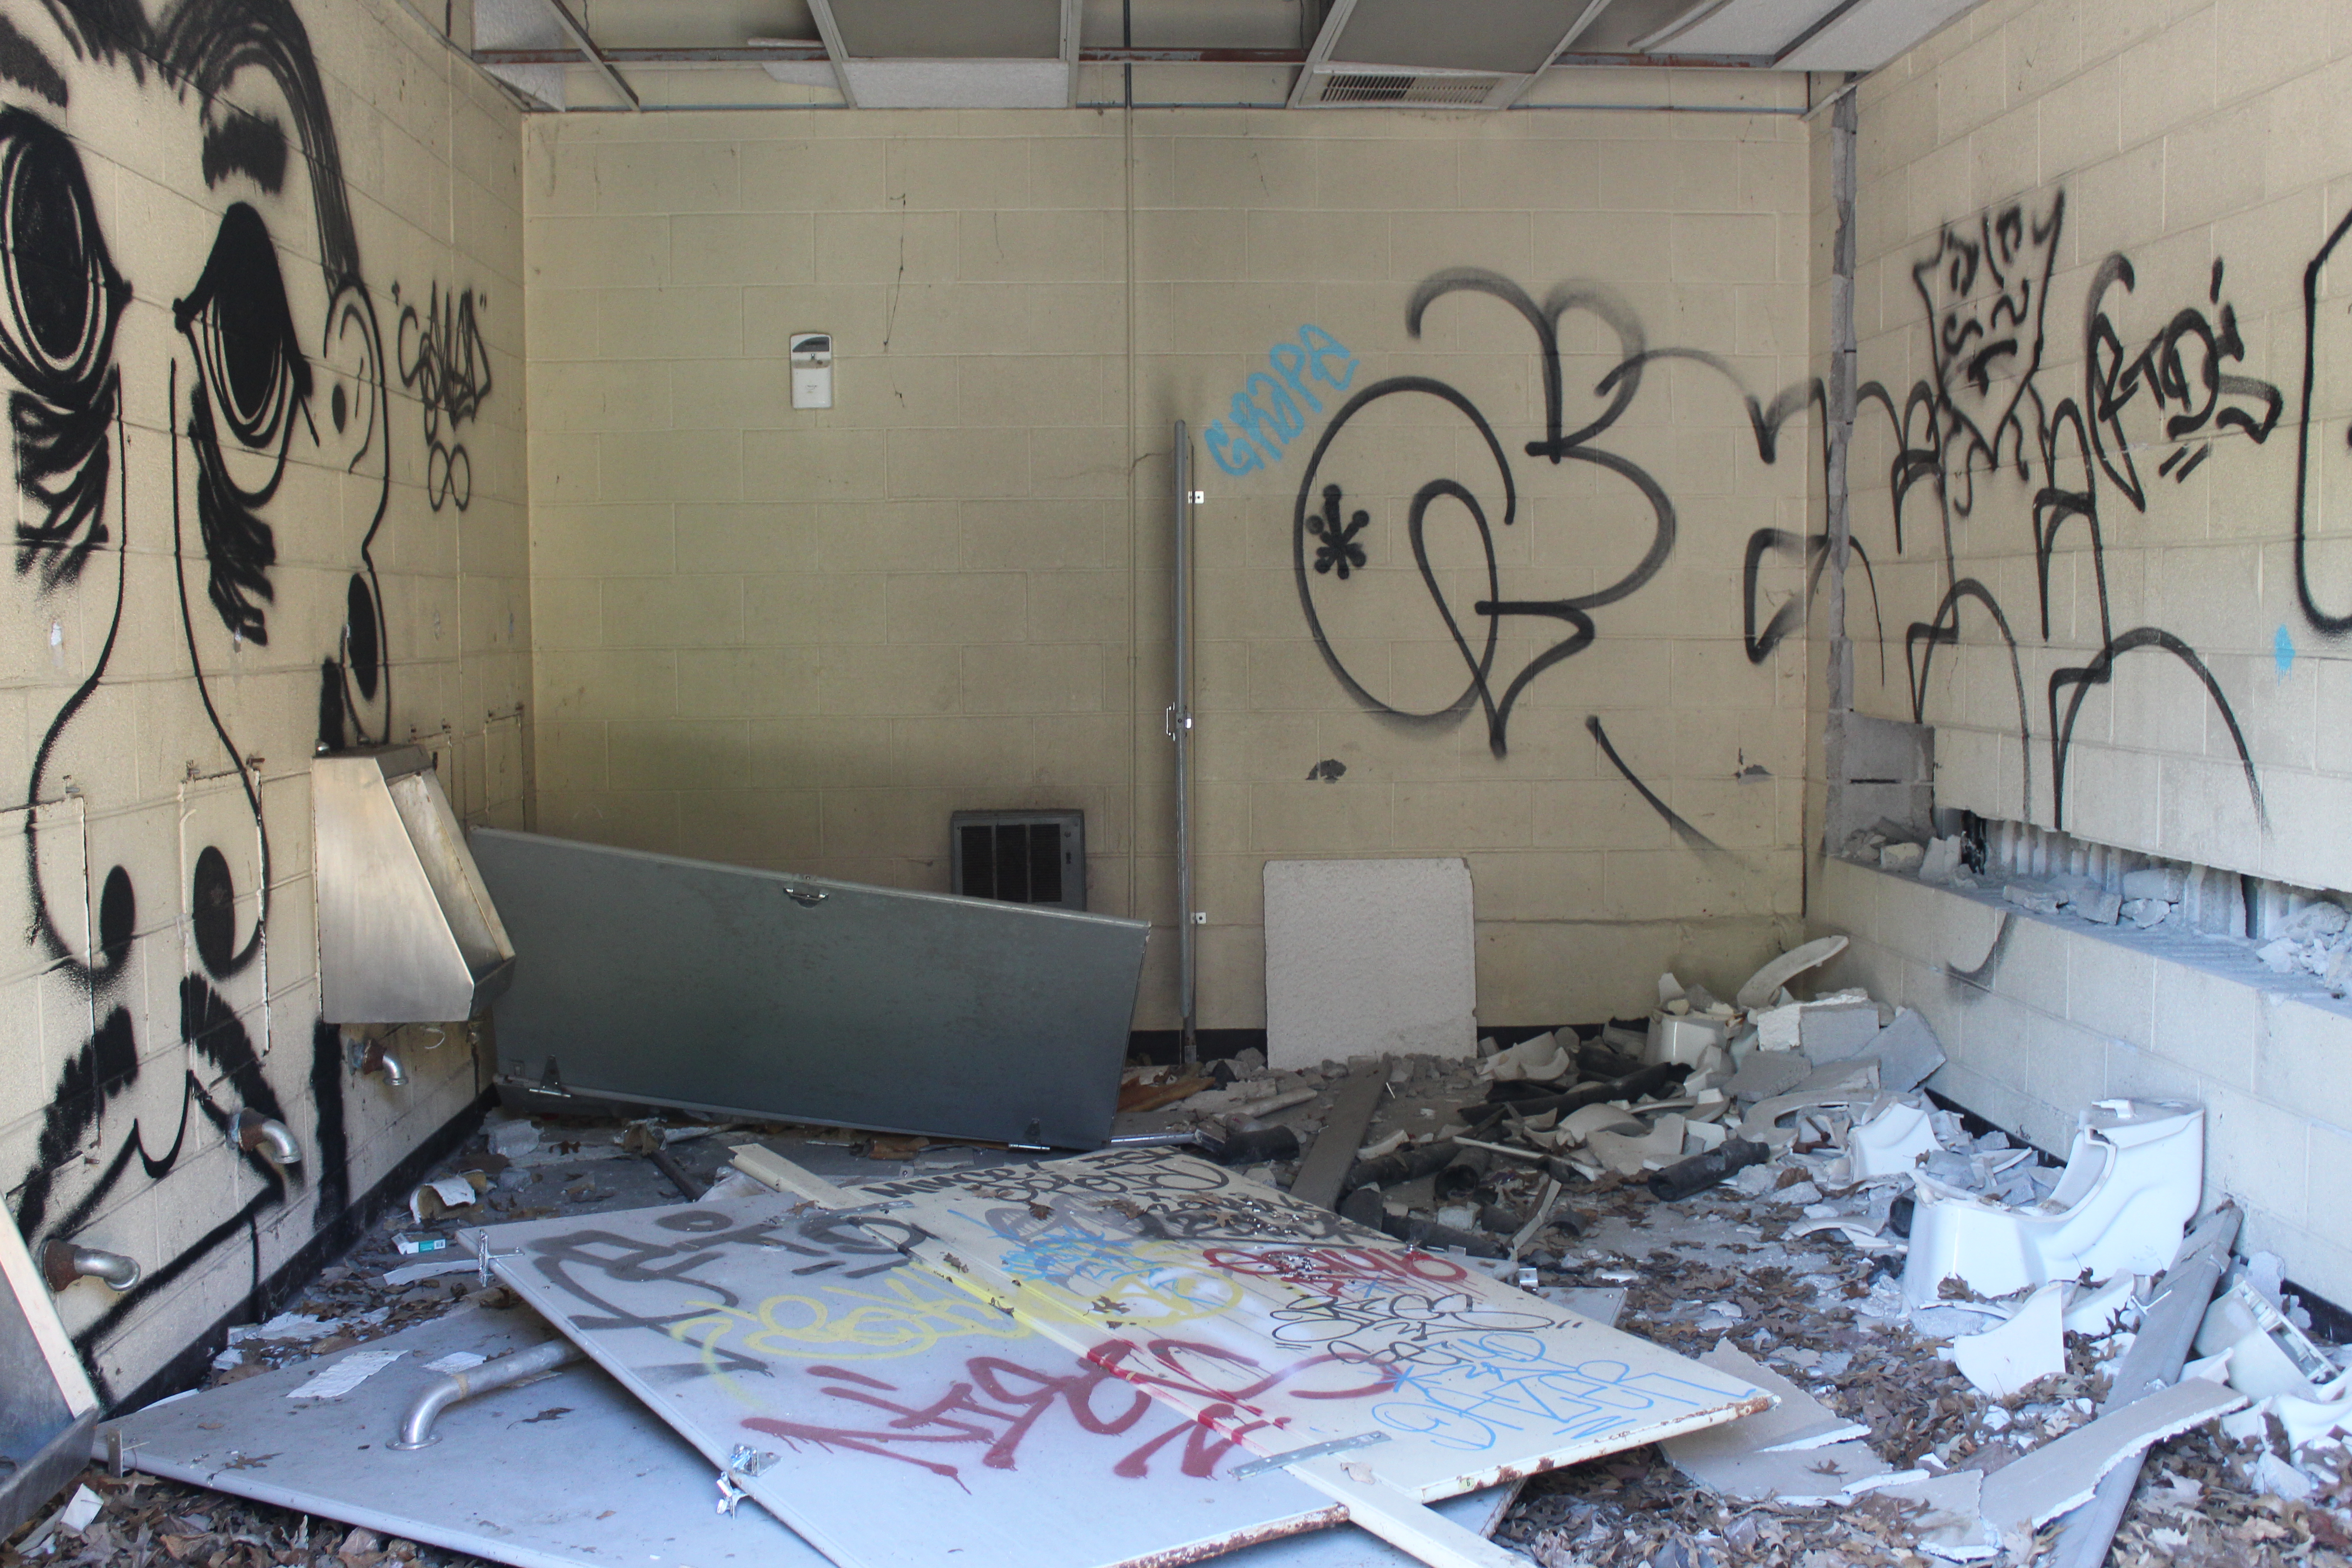 Abandoned and graffiti filled restroom at Belle Isle Zoo with smashed sinks and toilets.